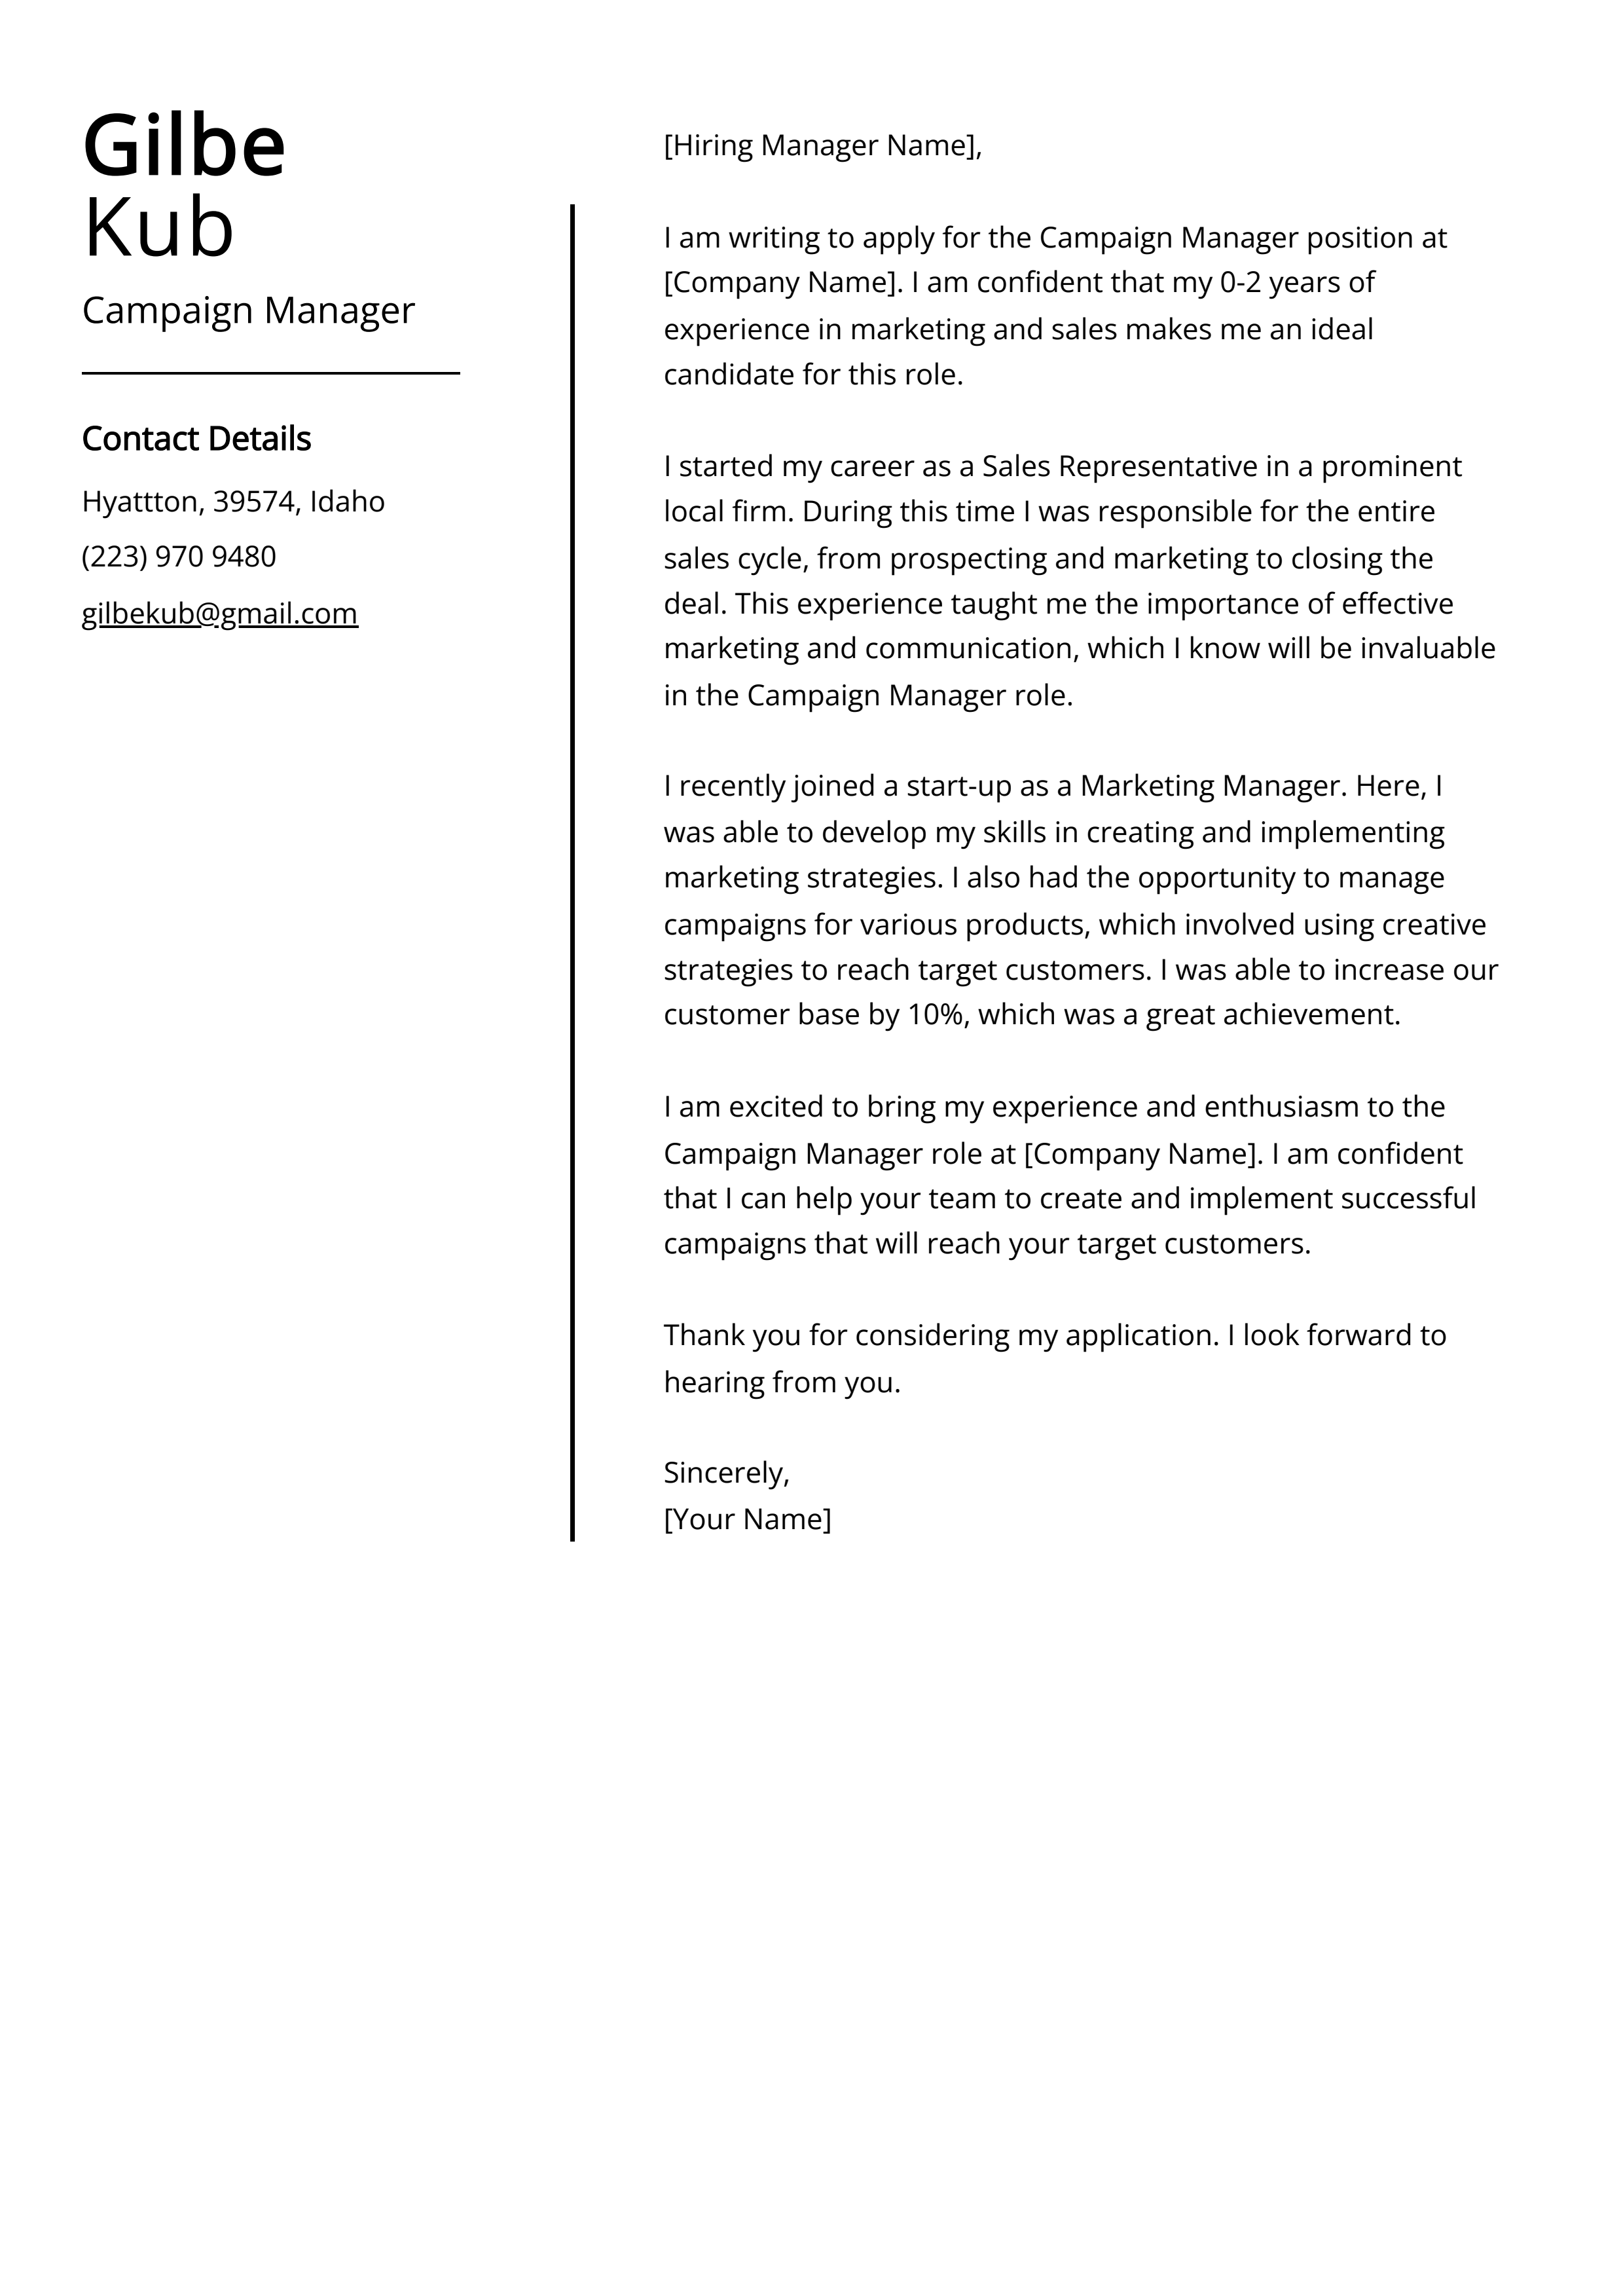 Campaign Manager Cover Letter Example